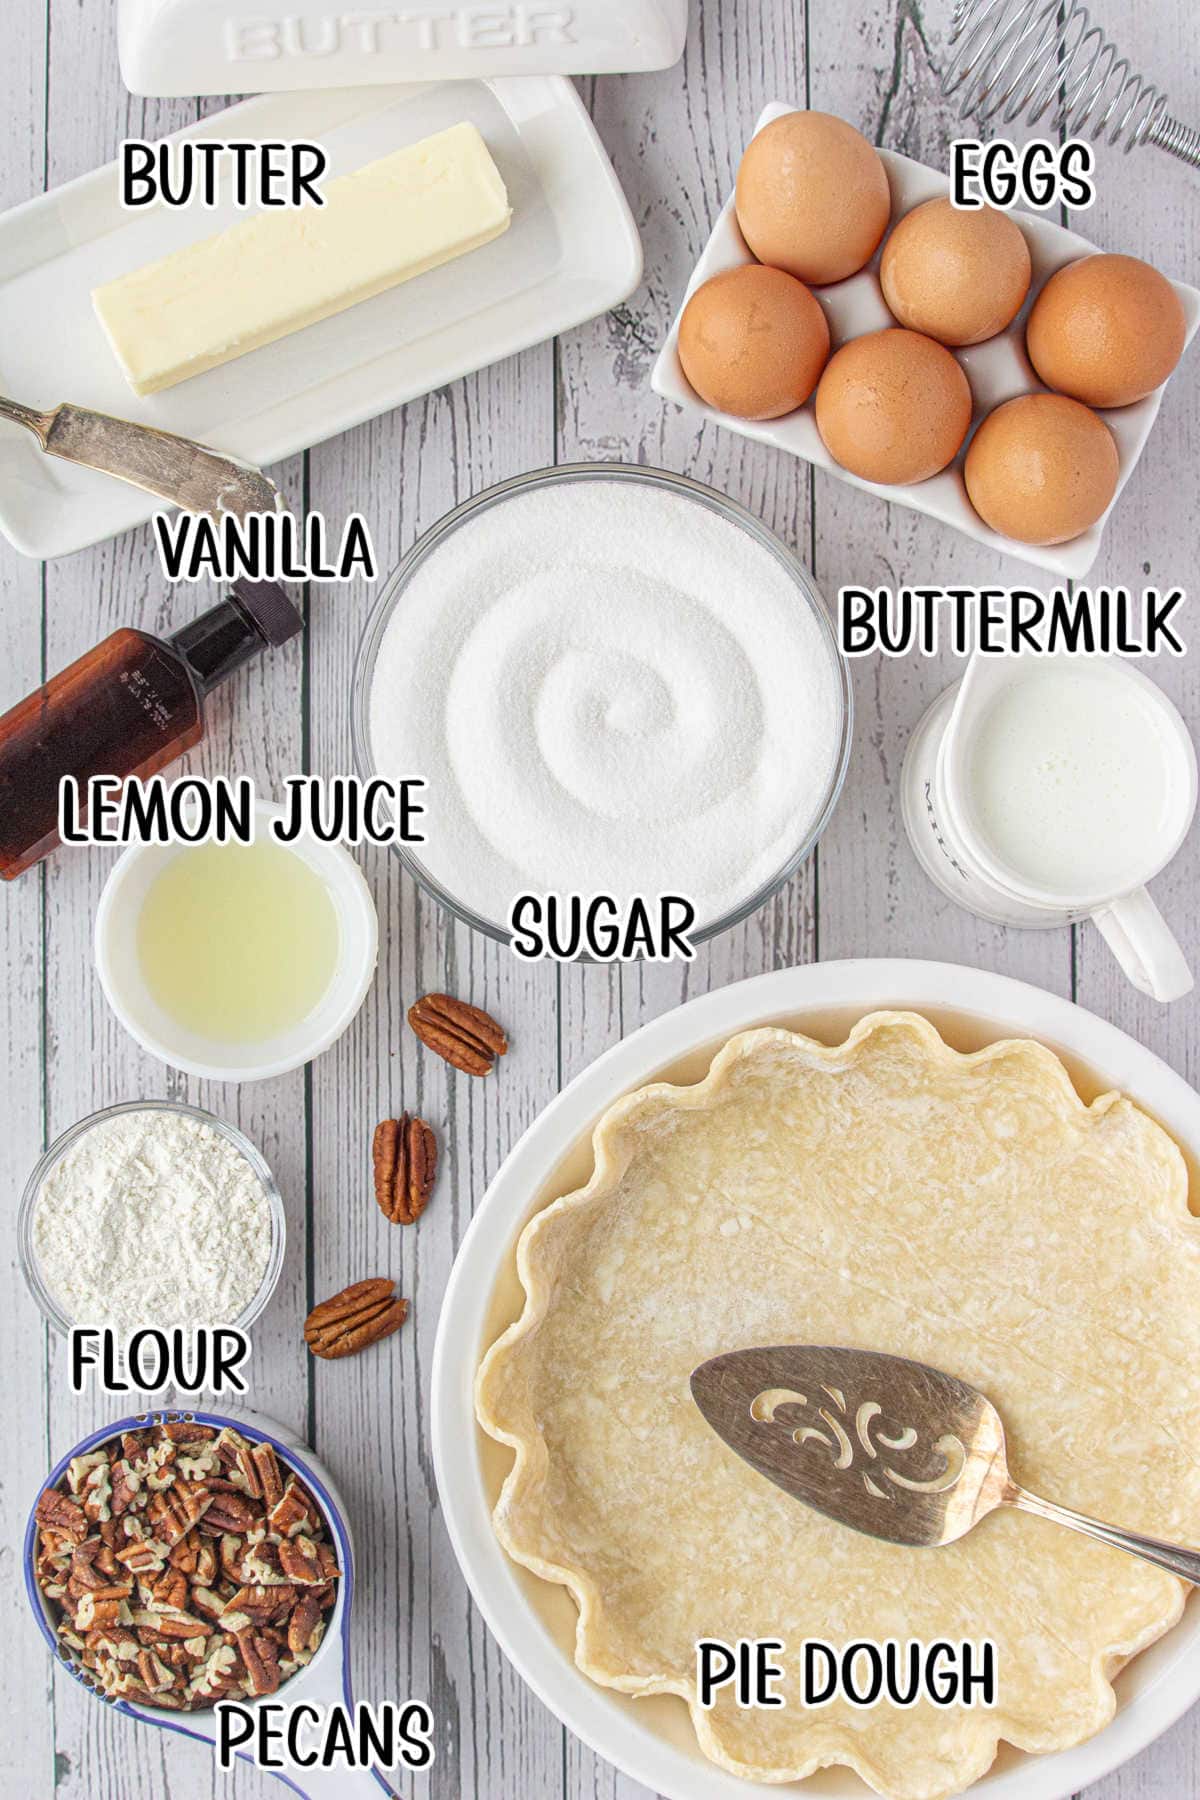 An overhead photo with text overlay showing the raw ingredients in small bowls or containers, including pie dough, pecans, buttermilk, eggs, butter, vanilla, flour, and lemon juice.